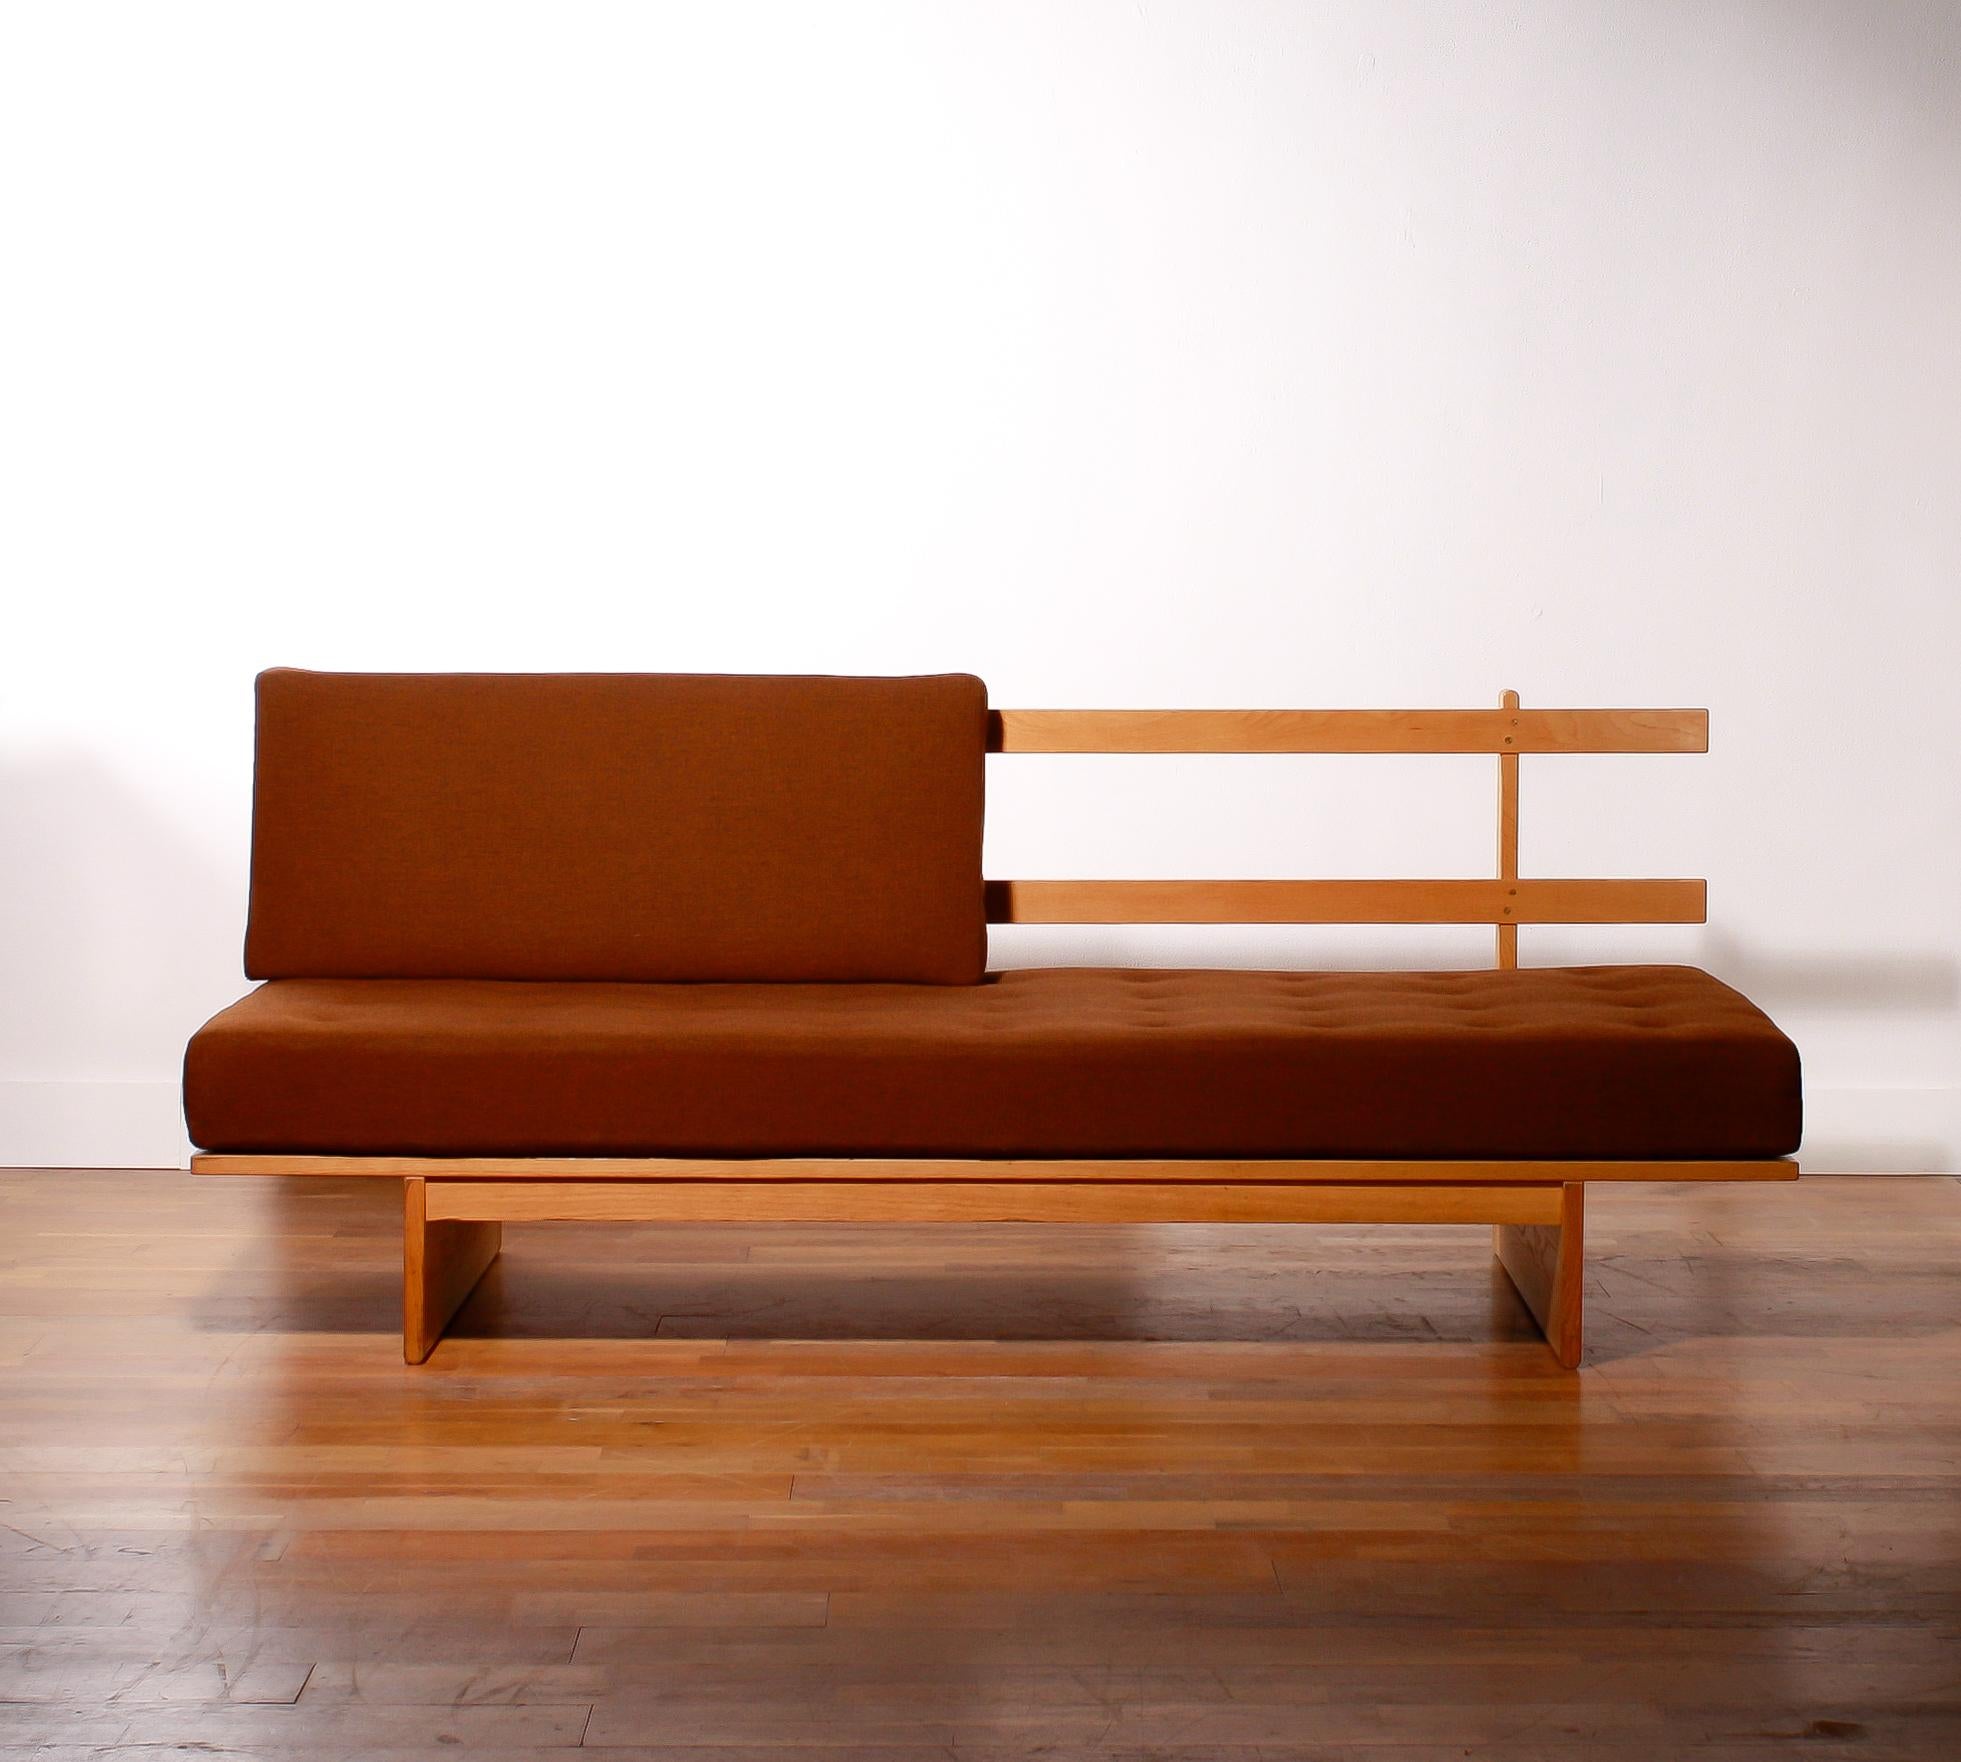 In absolute top condition sleeper or daybed in oak and dark brown wool.
The oak wood frame and the dark brown wool upholstery are in excellent condition.
Designed by Bra Bohag.
Manufactured by DUX.
Design period 1960-1969.
The dimensions are H